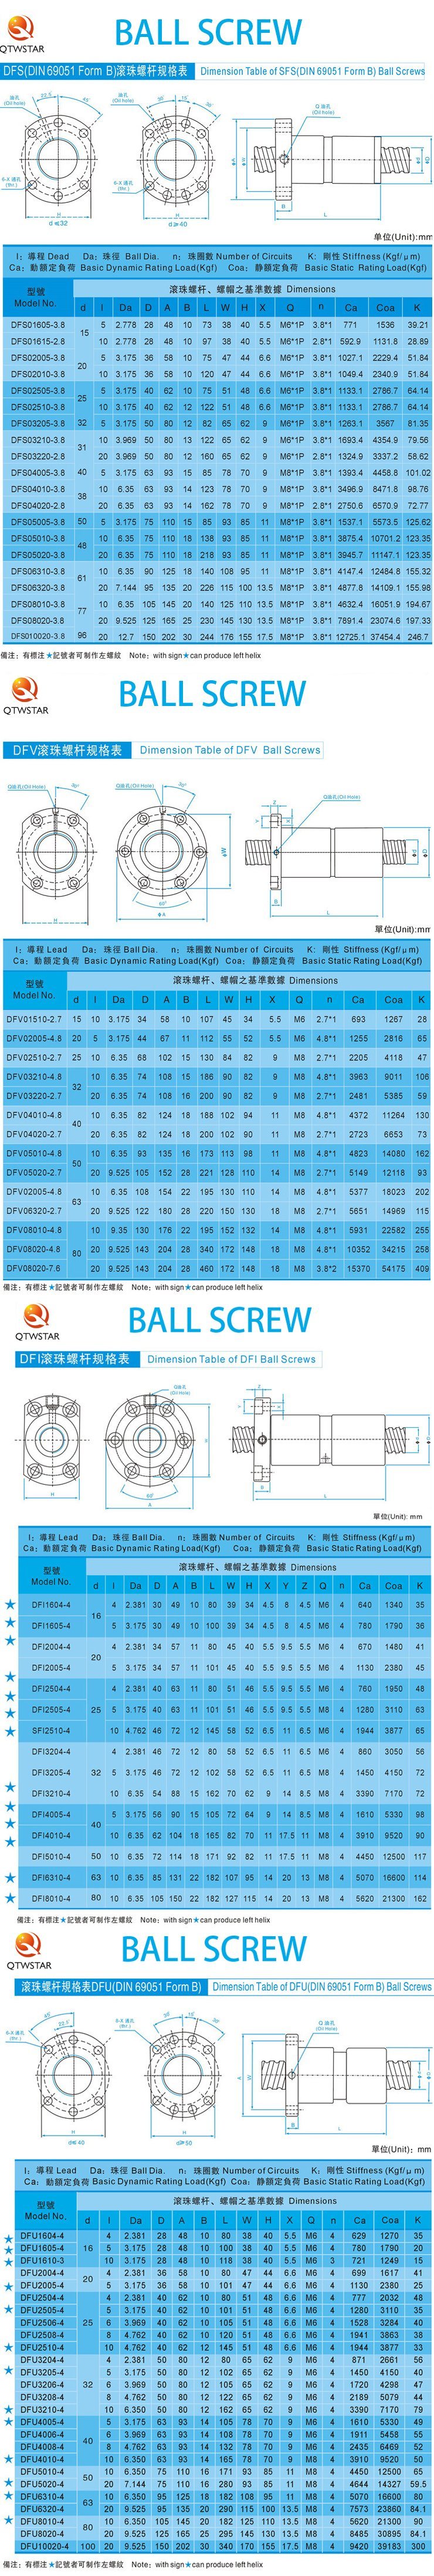 Botswana The Difference Between Ball Screw and Screw, Ball Screw and Ball Screw